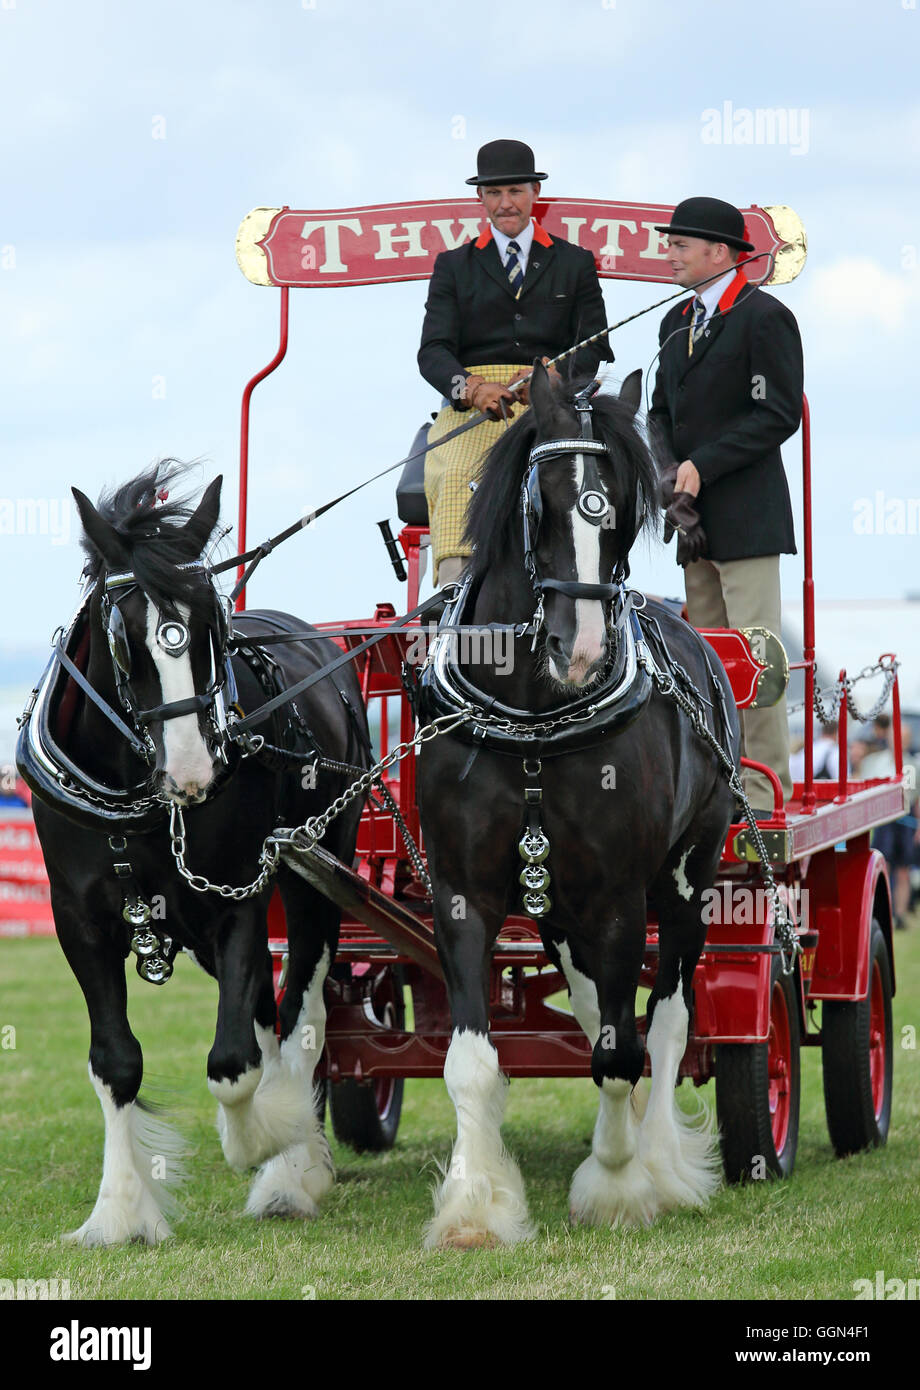 Pair of Shire horses pulling a Thwaites dray wagon on the showground at the Emley Agricultural show, Emley, Huddersfield, England, UK in August 2016. Stock Photo